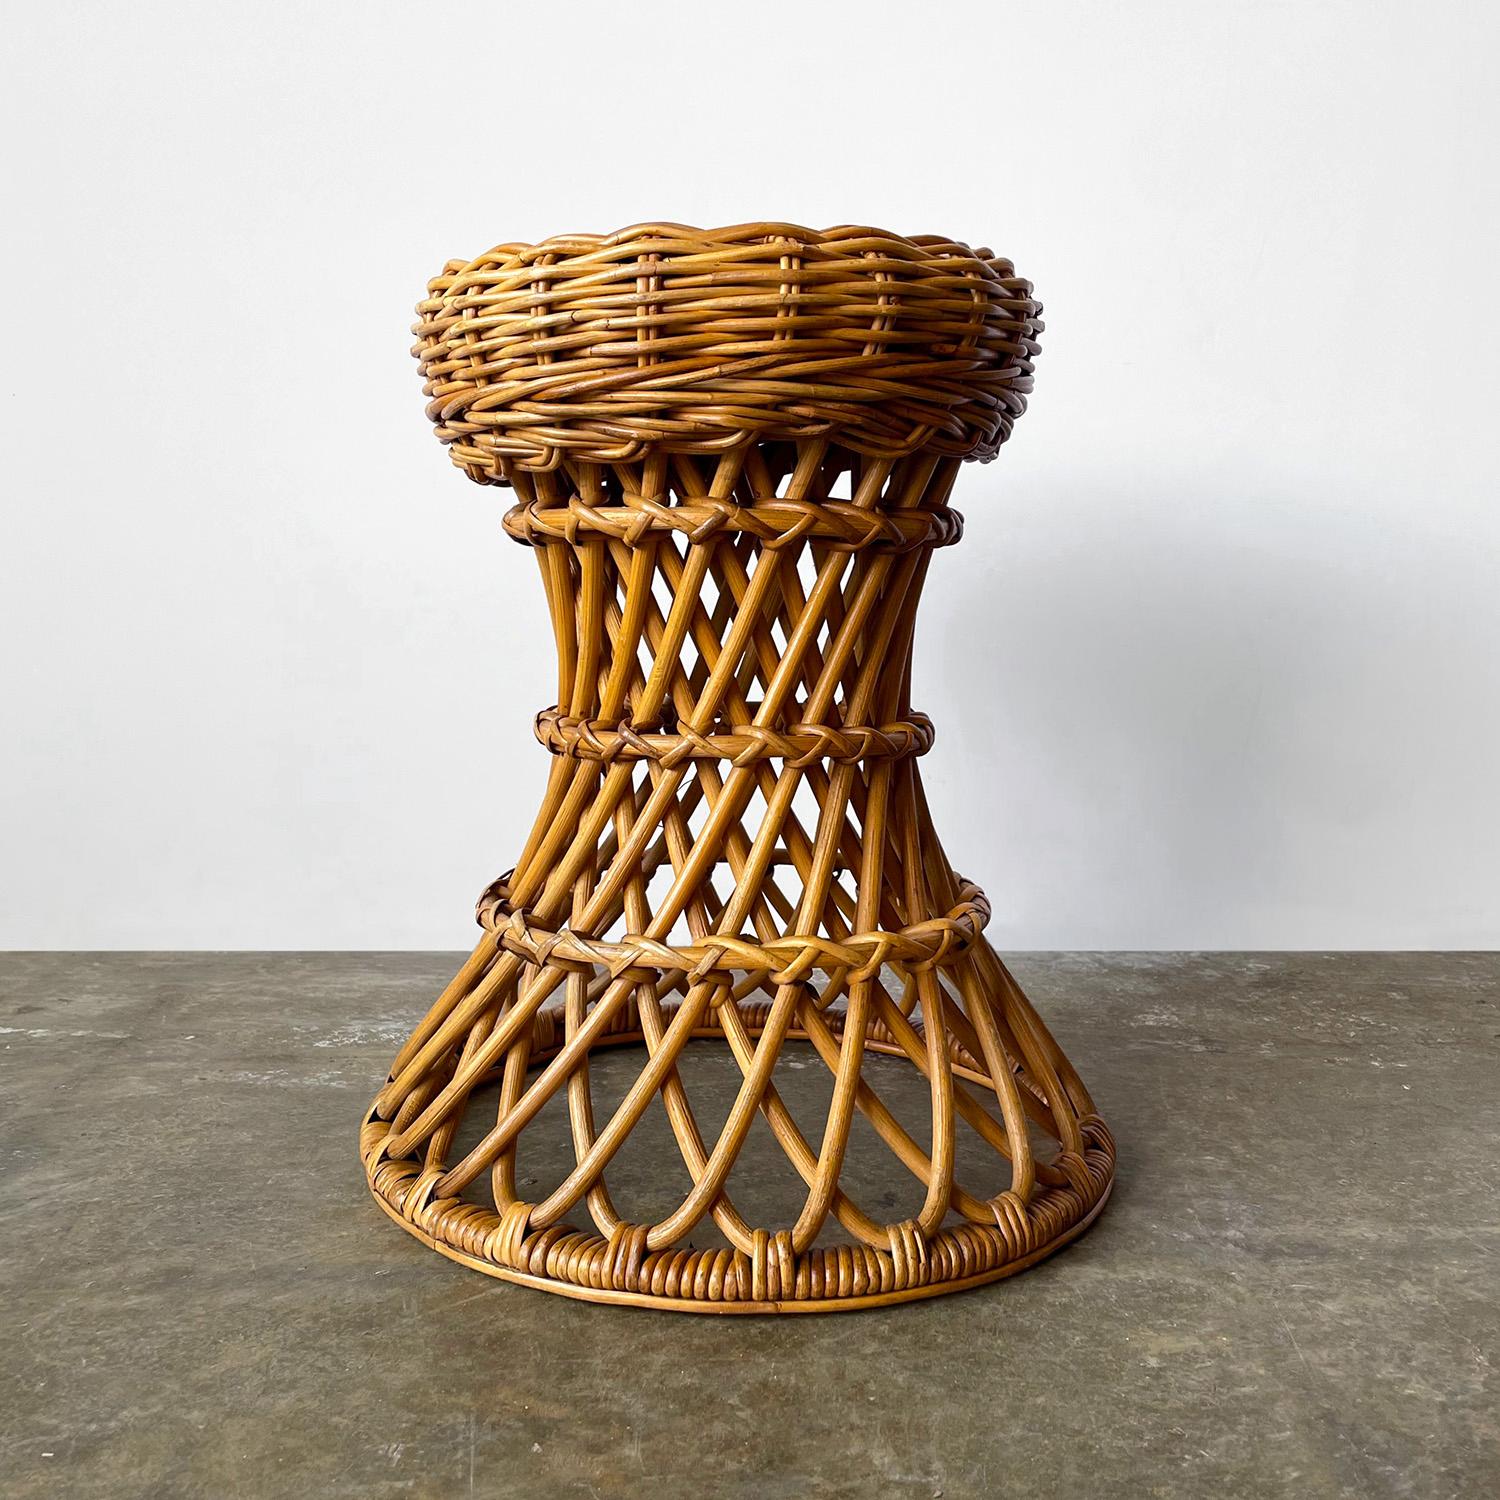 Italian rattan hourglass stool
Italy, circa 1960s
Beautifully handcrafted piece 
Constructed of intricately woven wicker and rattan reeds
Newly reconditioned
Patina from age and use
This listing is for a single stool
Last photo for Size